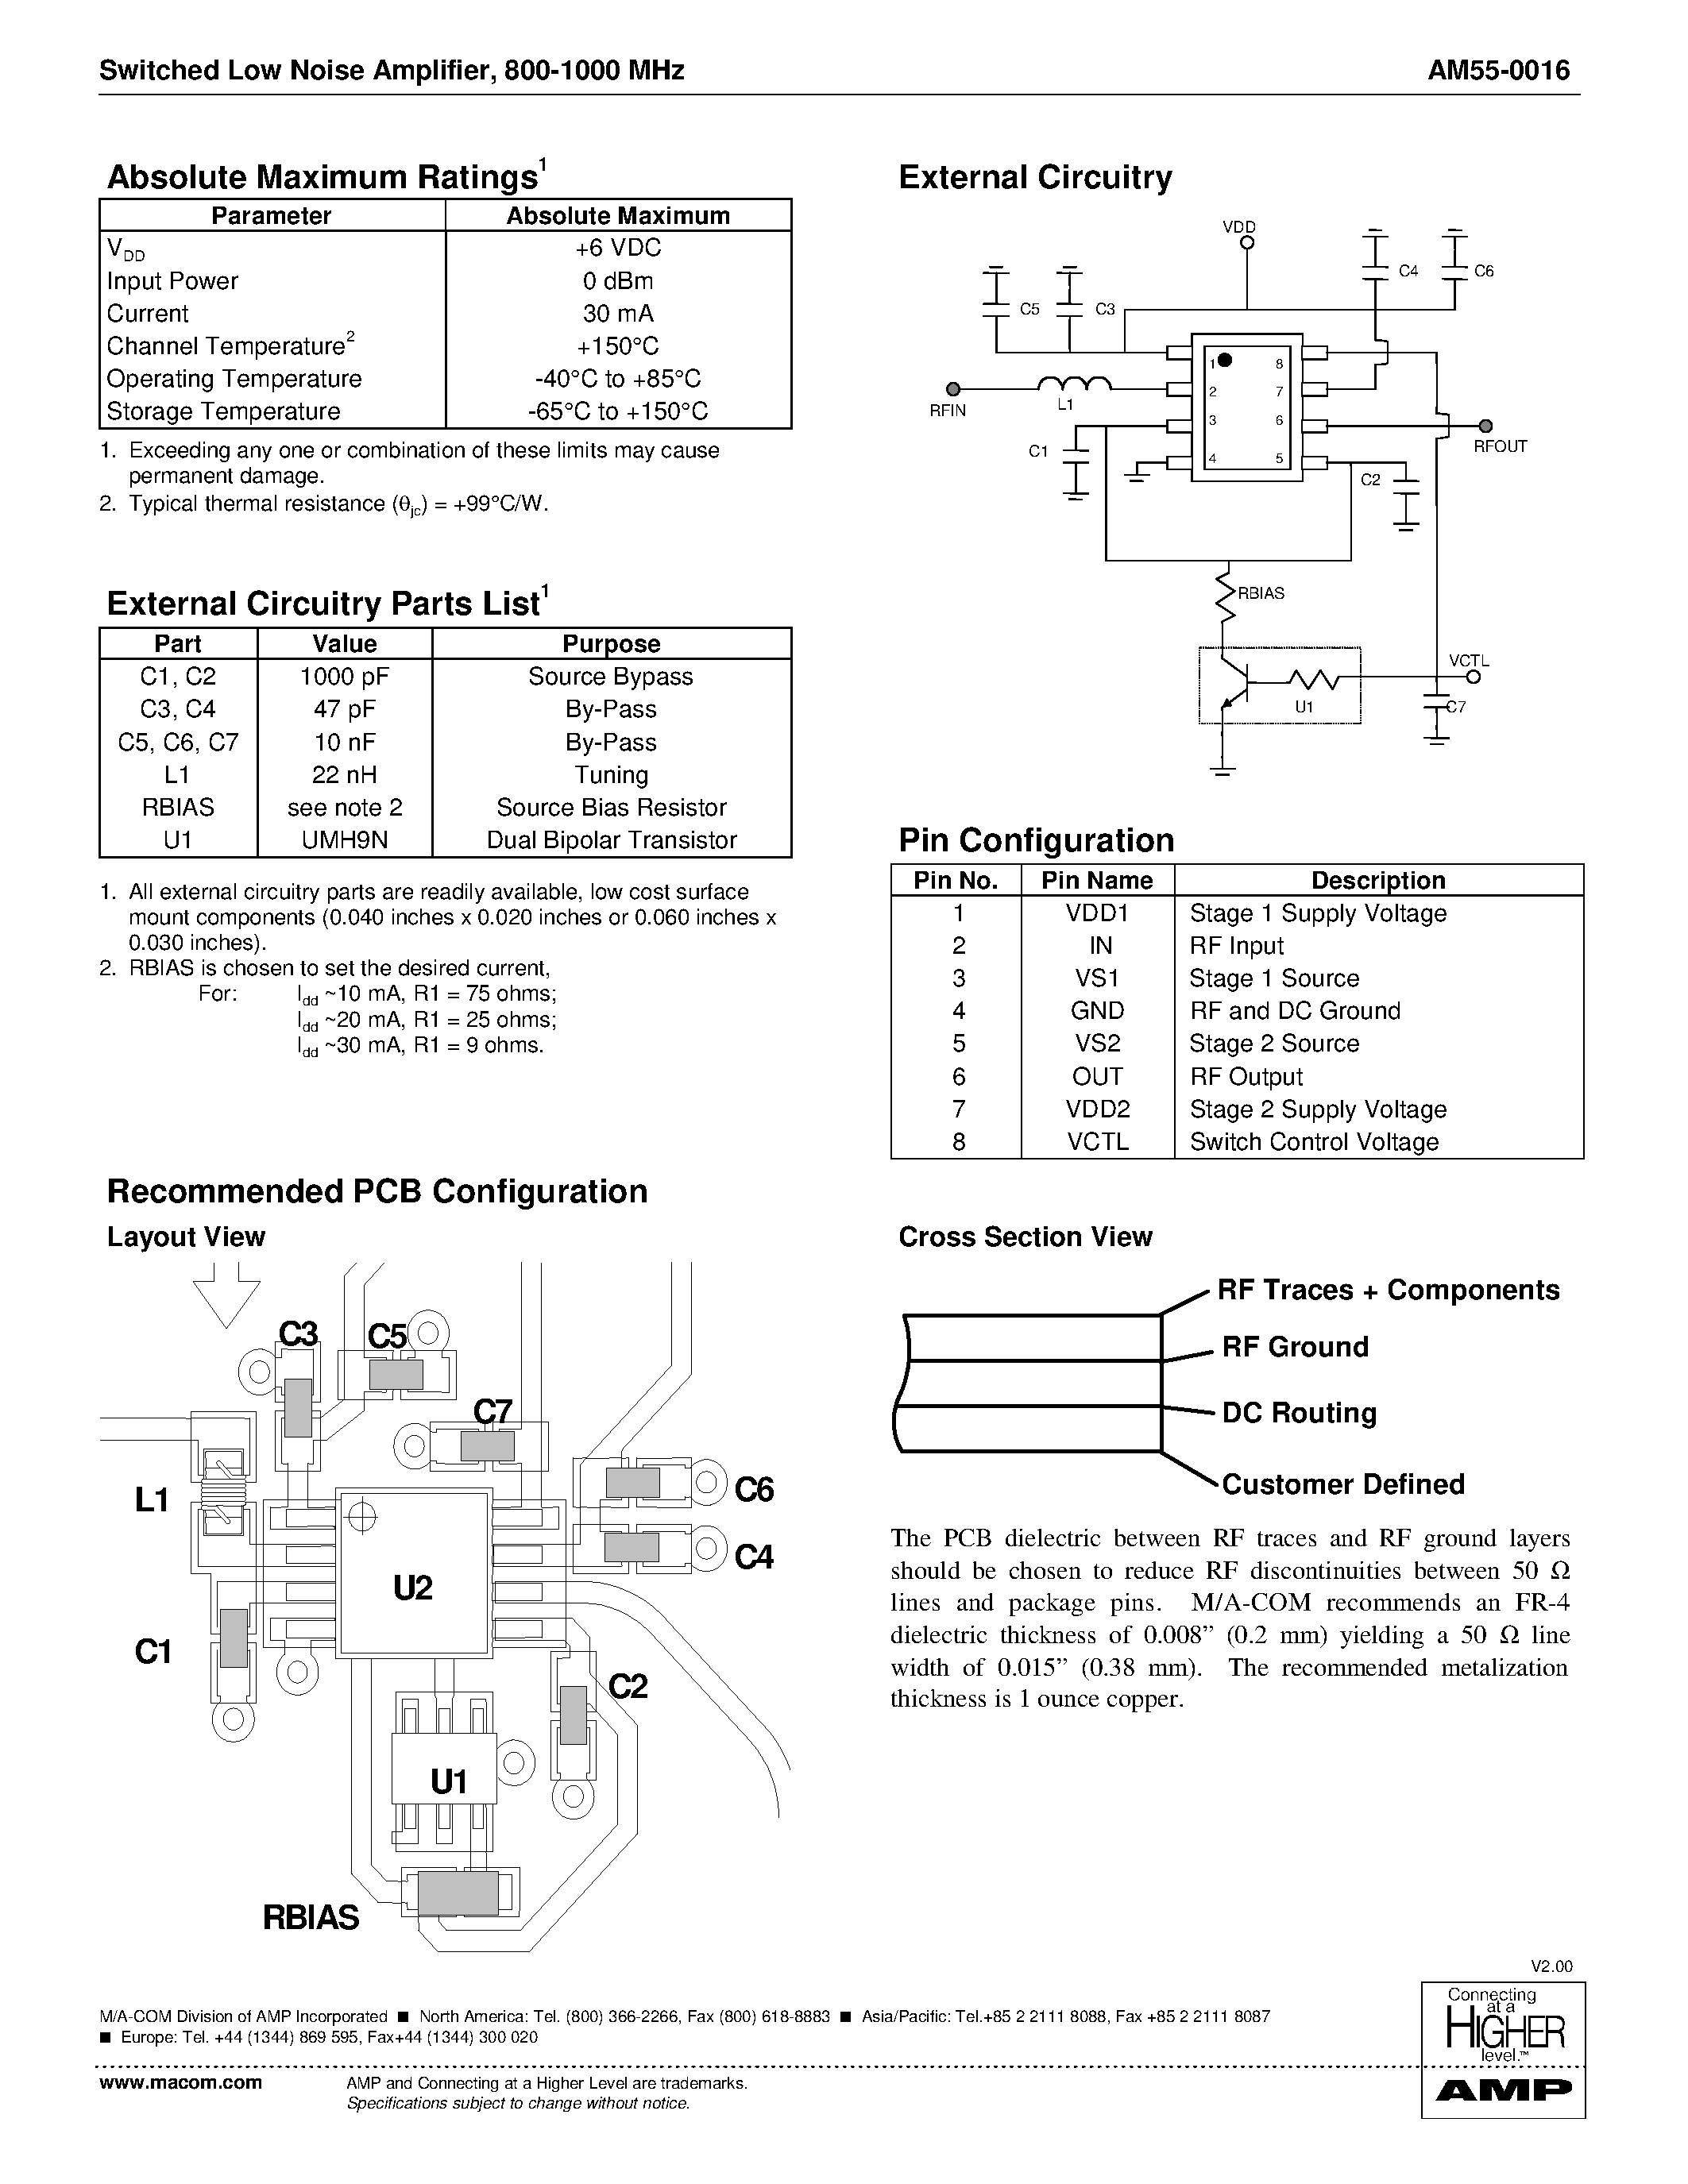 Datasheet AM55-0016RTR - Switched Low Noise Amplifier 800 - 1000 MHz page 2